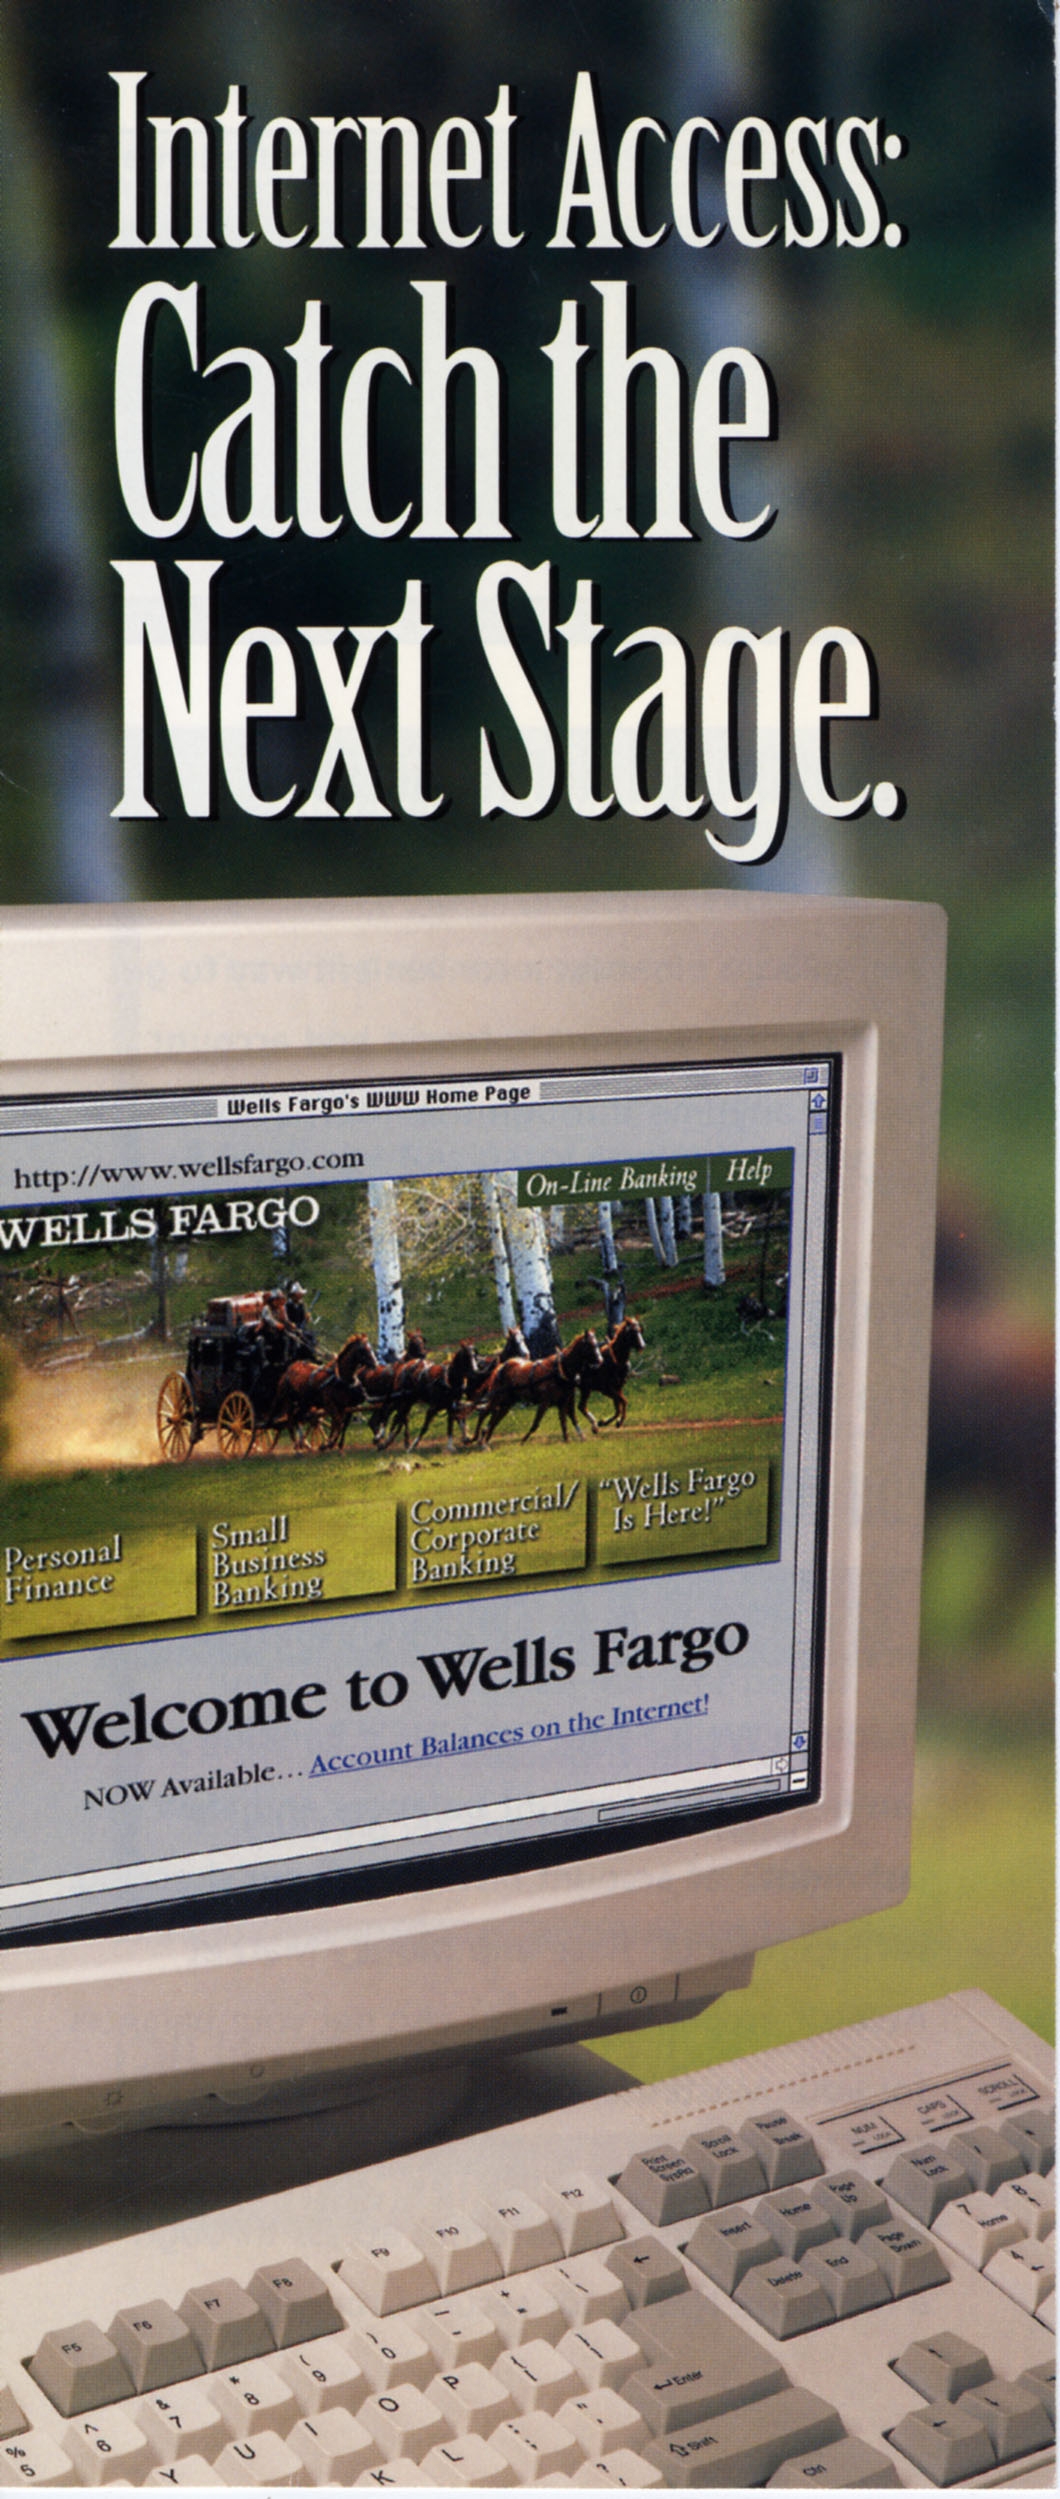 A computer monitor and keyboard in the foreground. On the screen is an image of a stagecoach and it reads Welcome to Wells Fargo. It is titled; Internet Access: Catch the next stage.